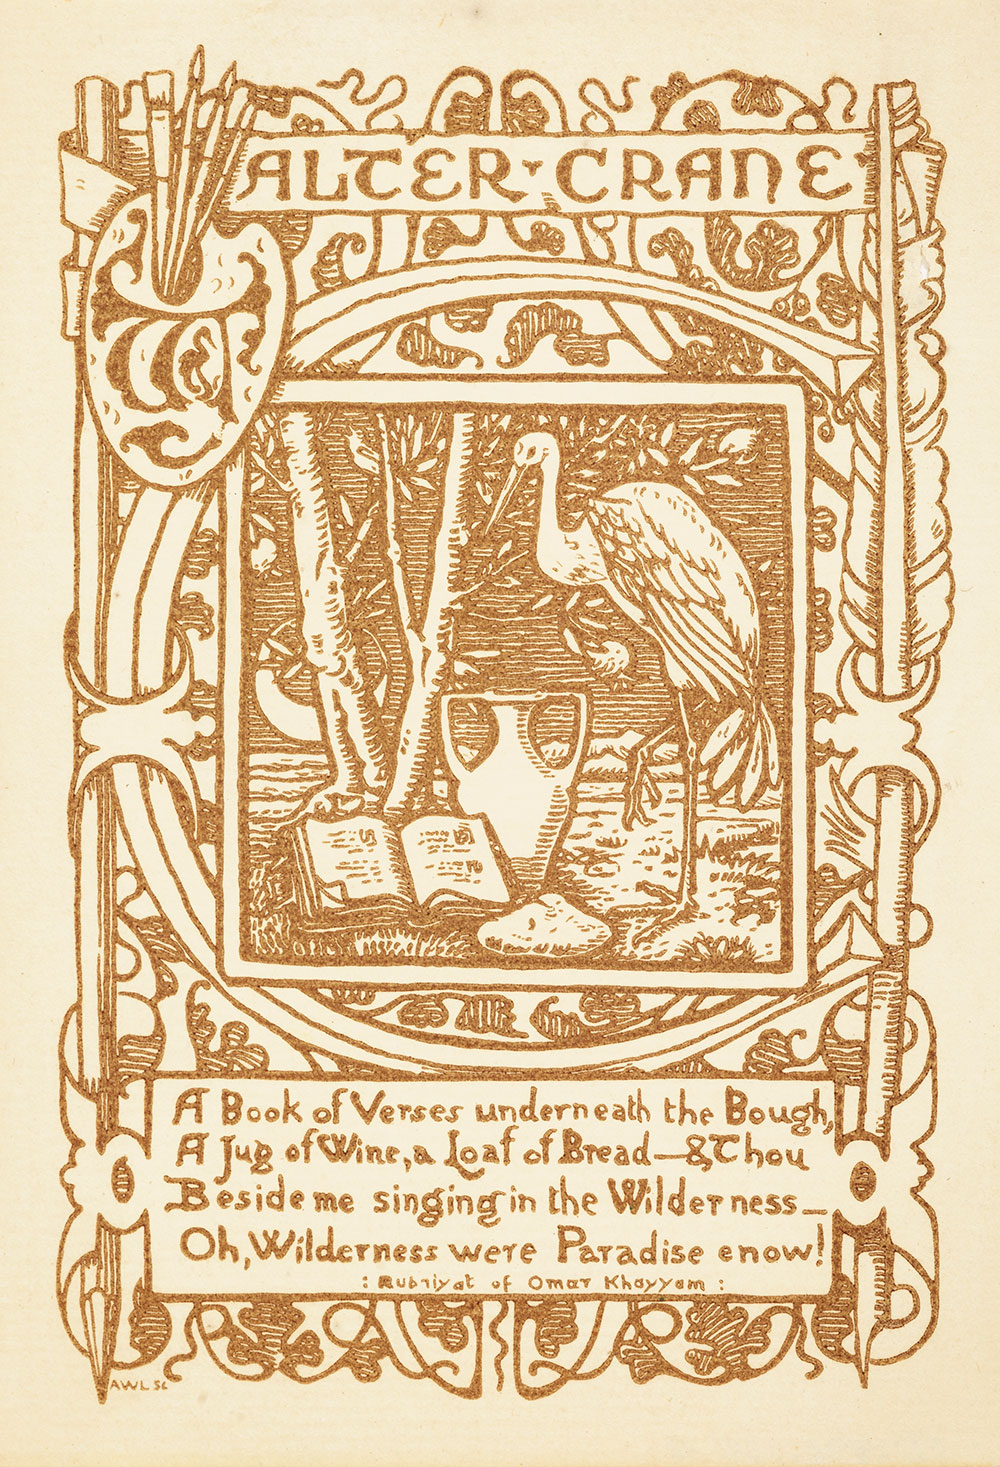 Bookplate from Walter Crane's book of verses